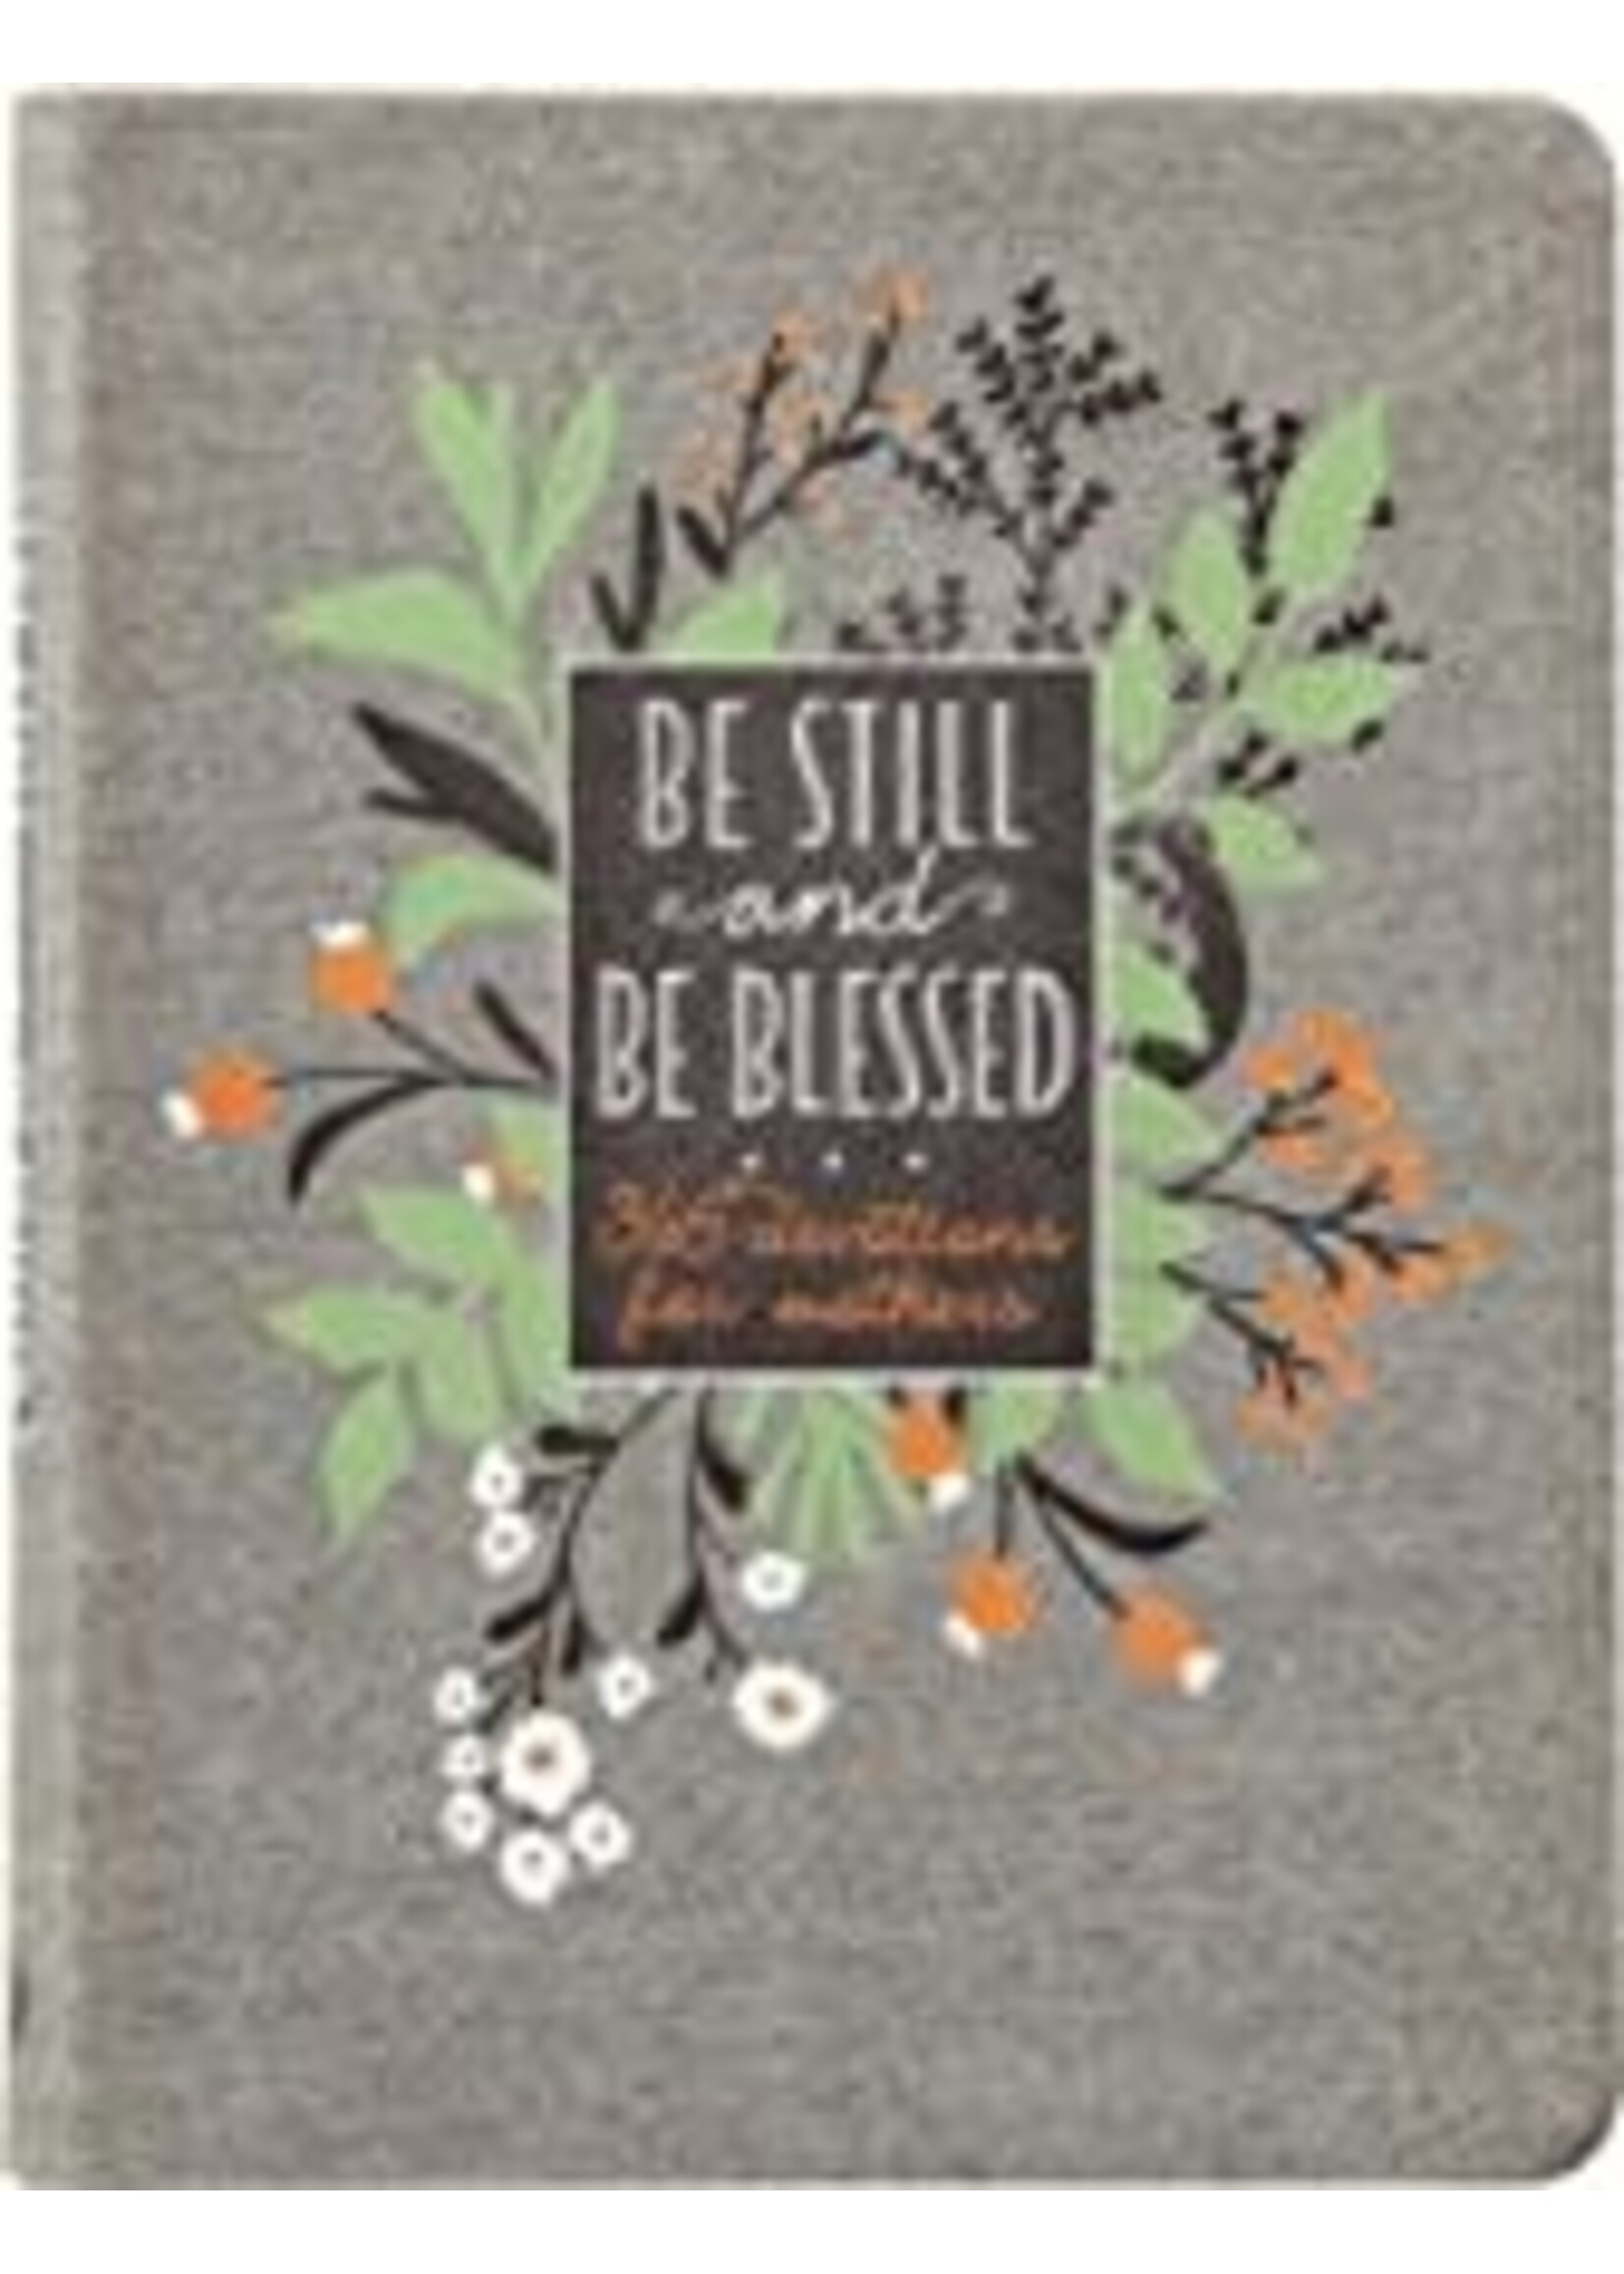 BE STILL AND BE BLESSED 365 DAILY D